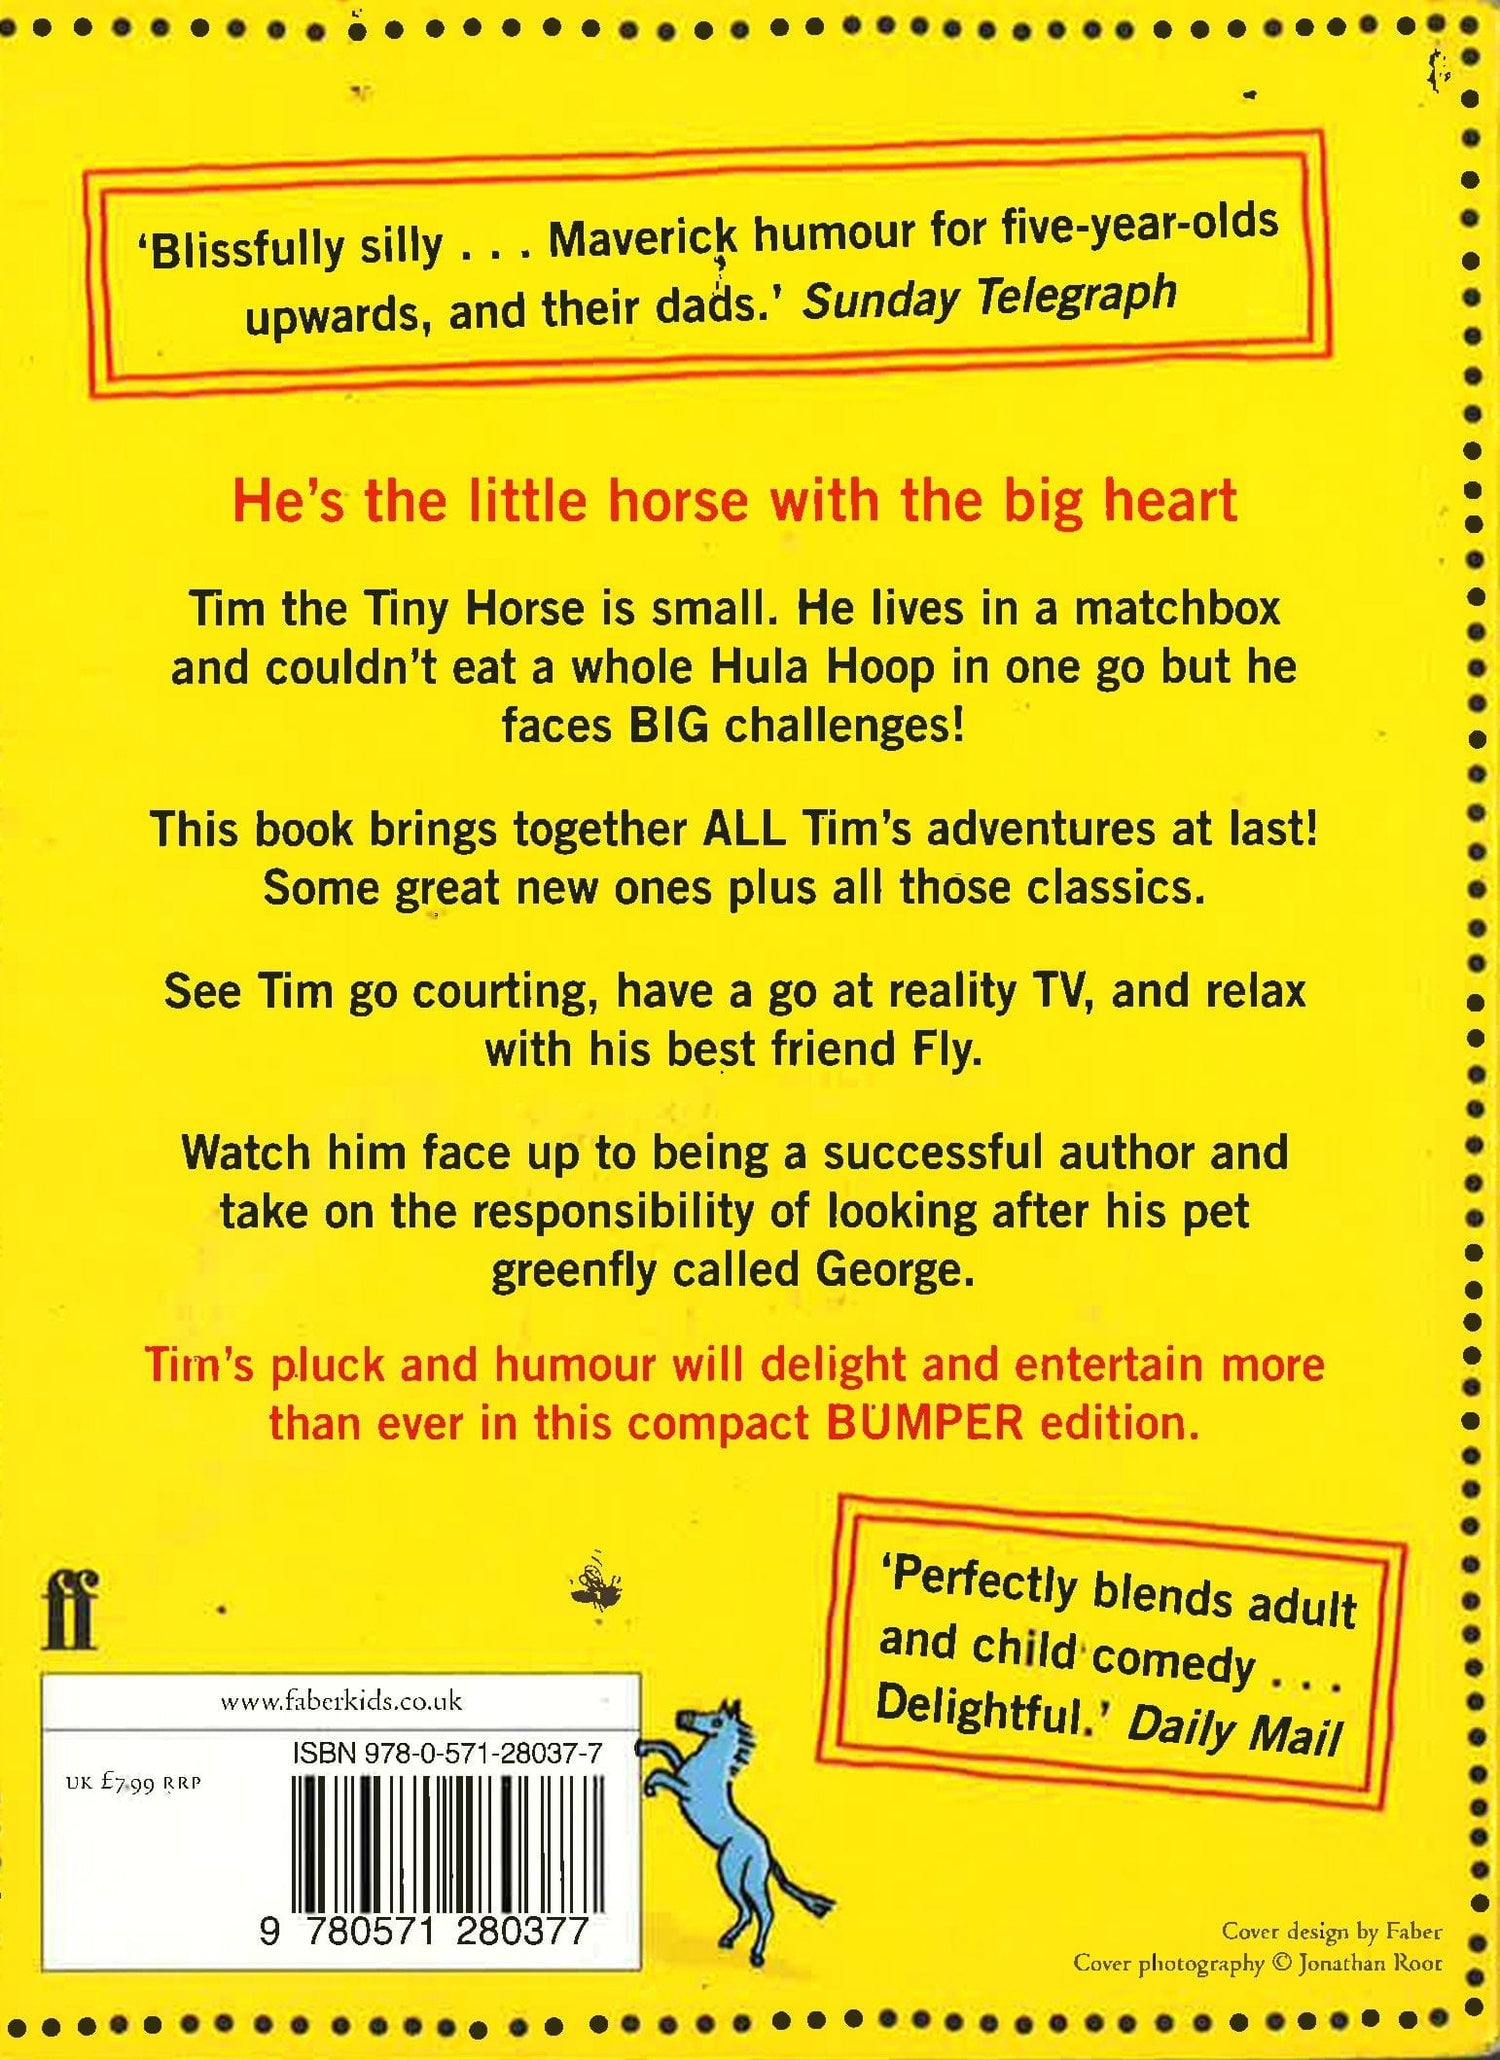 A Complete History of Tim (the Tiny Horse)